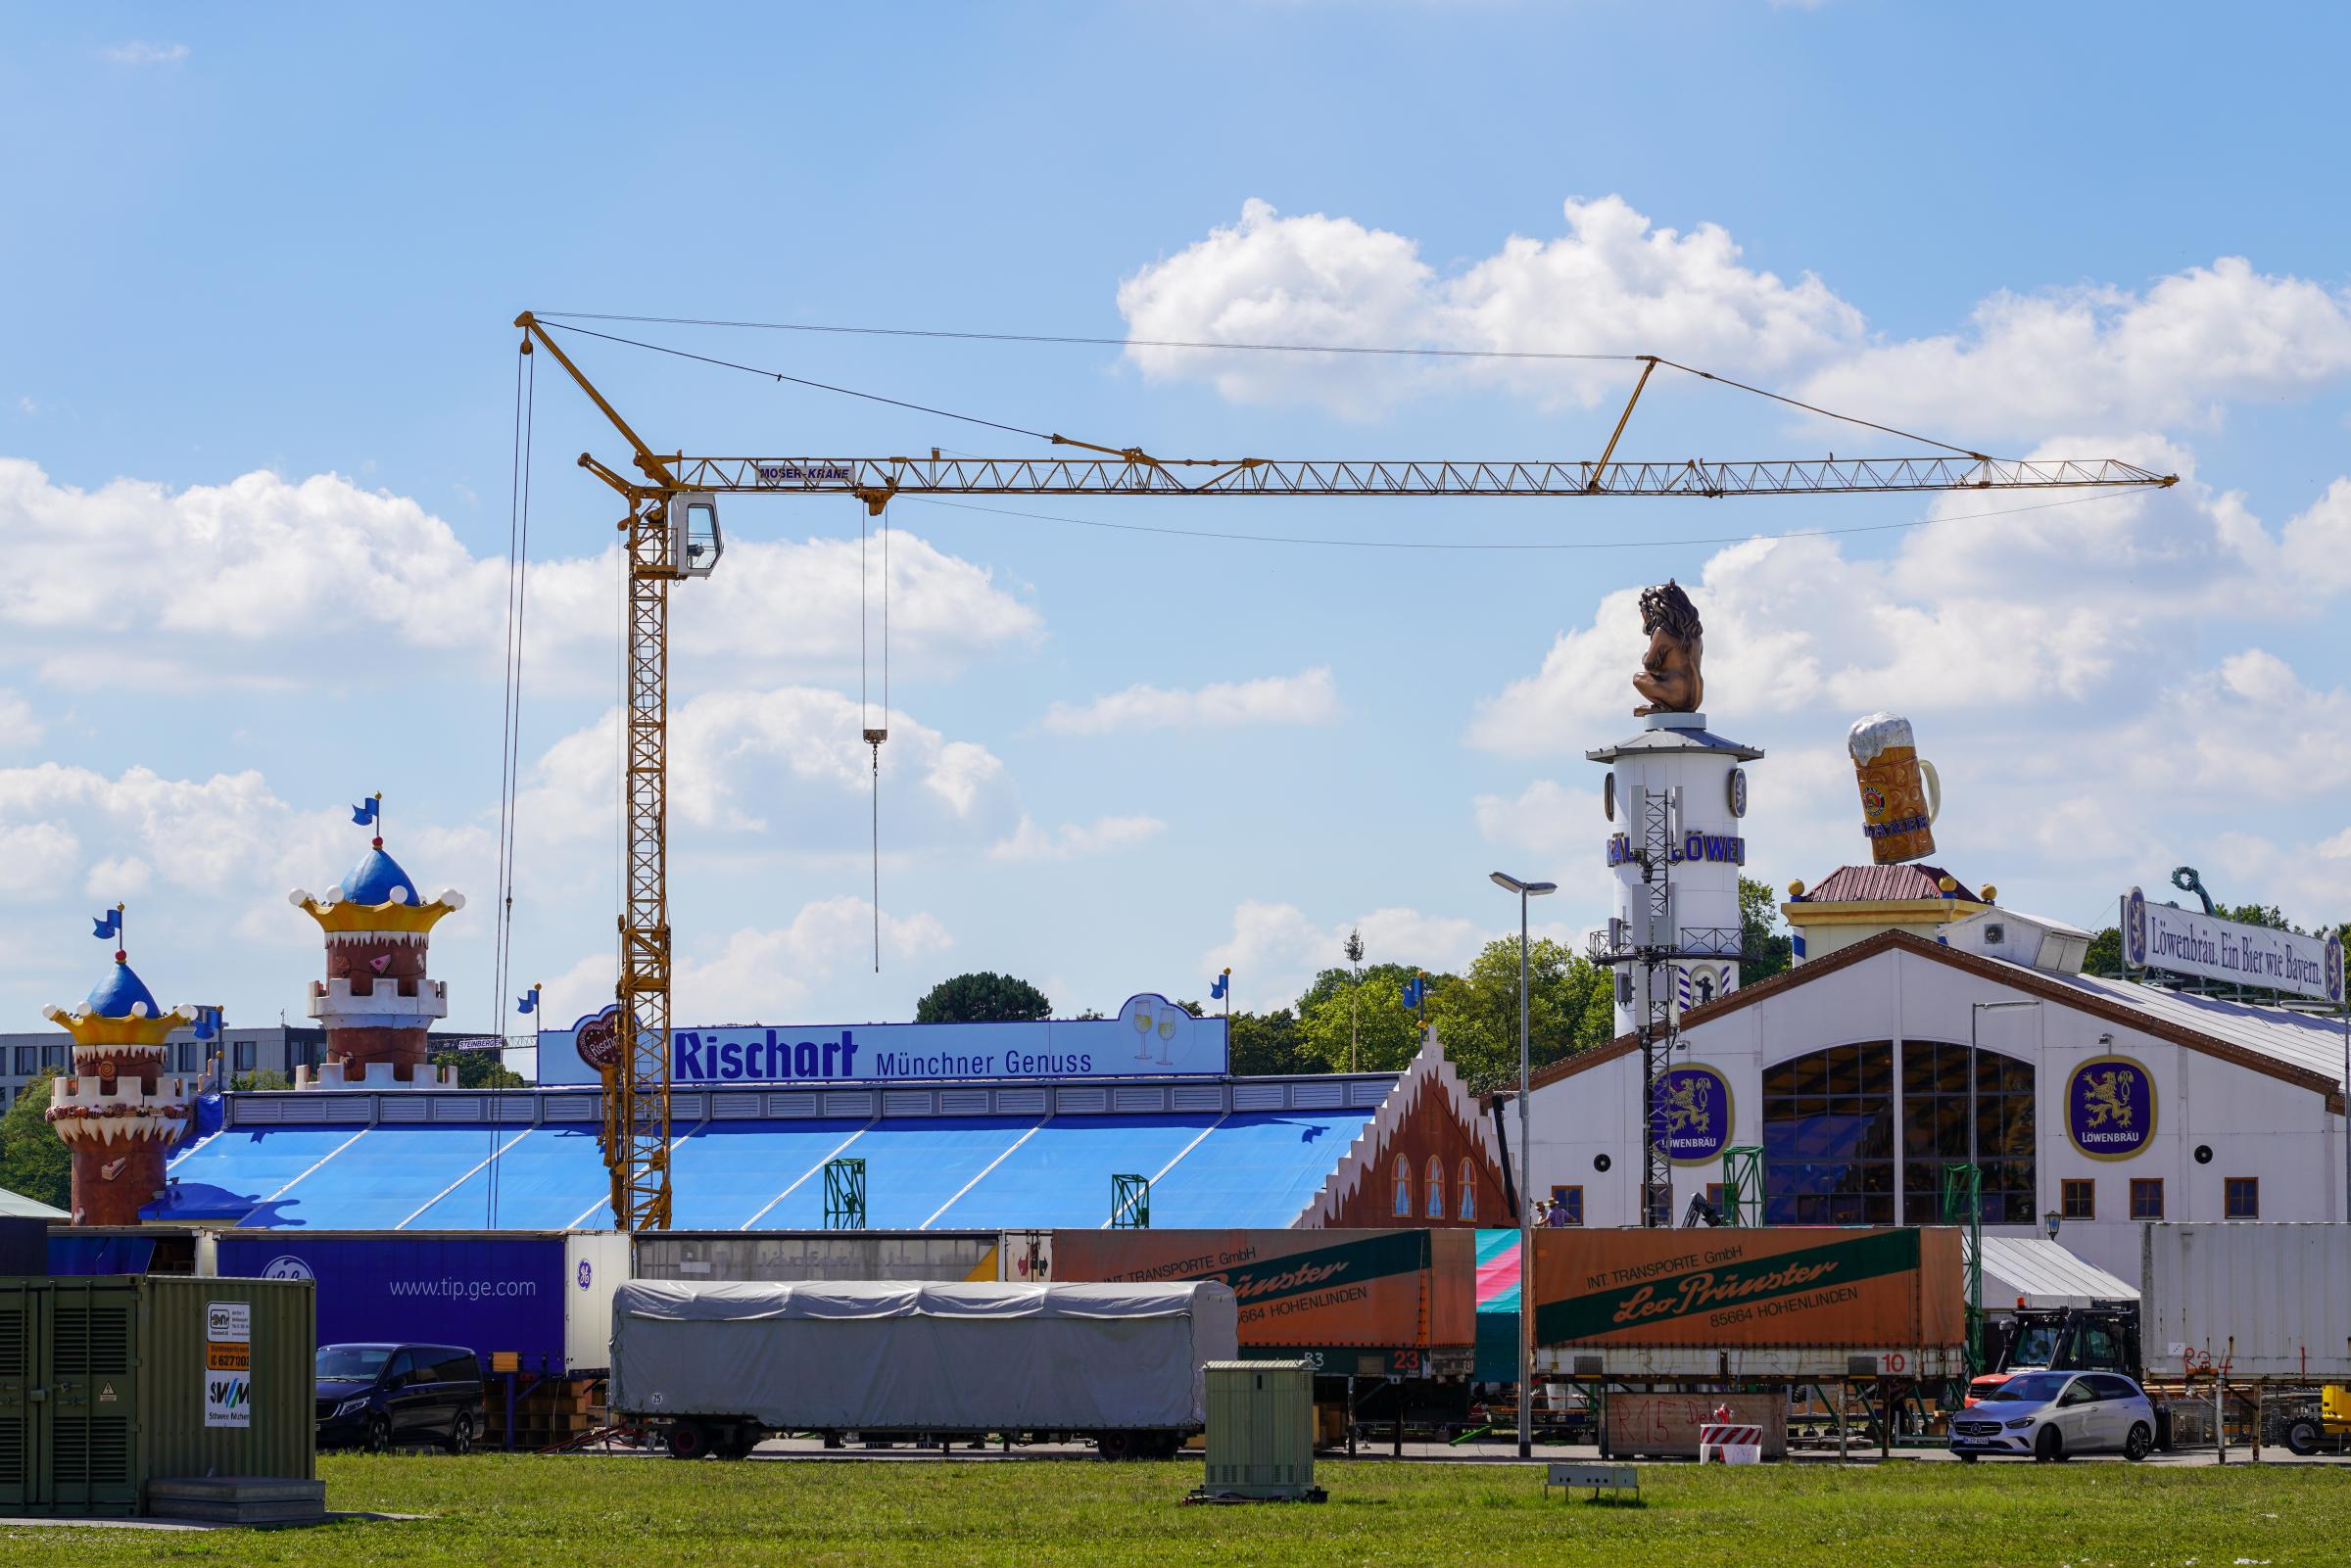 The Beer Tents for the world's largest Folk Festival, the Oktoberfest are set up